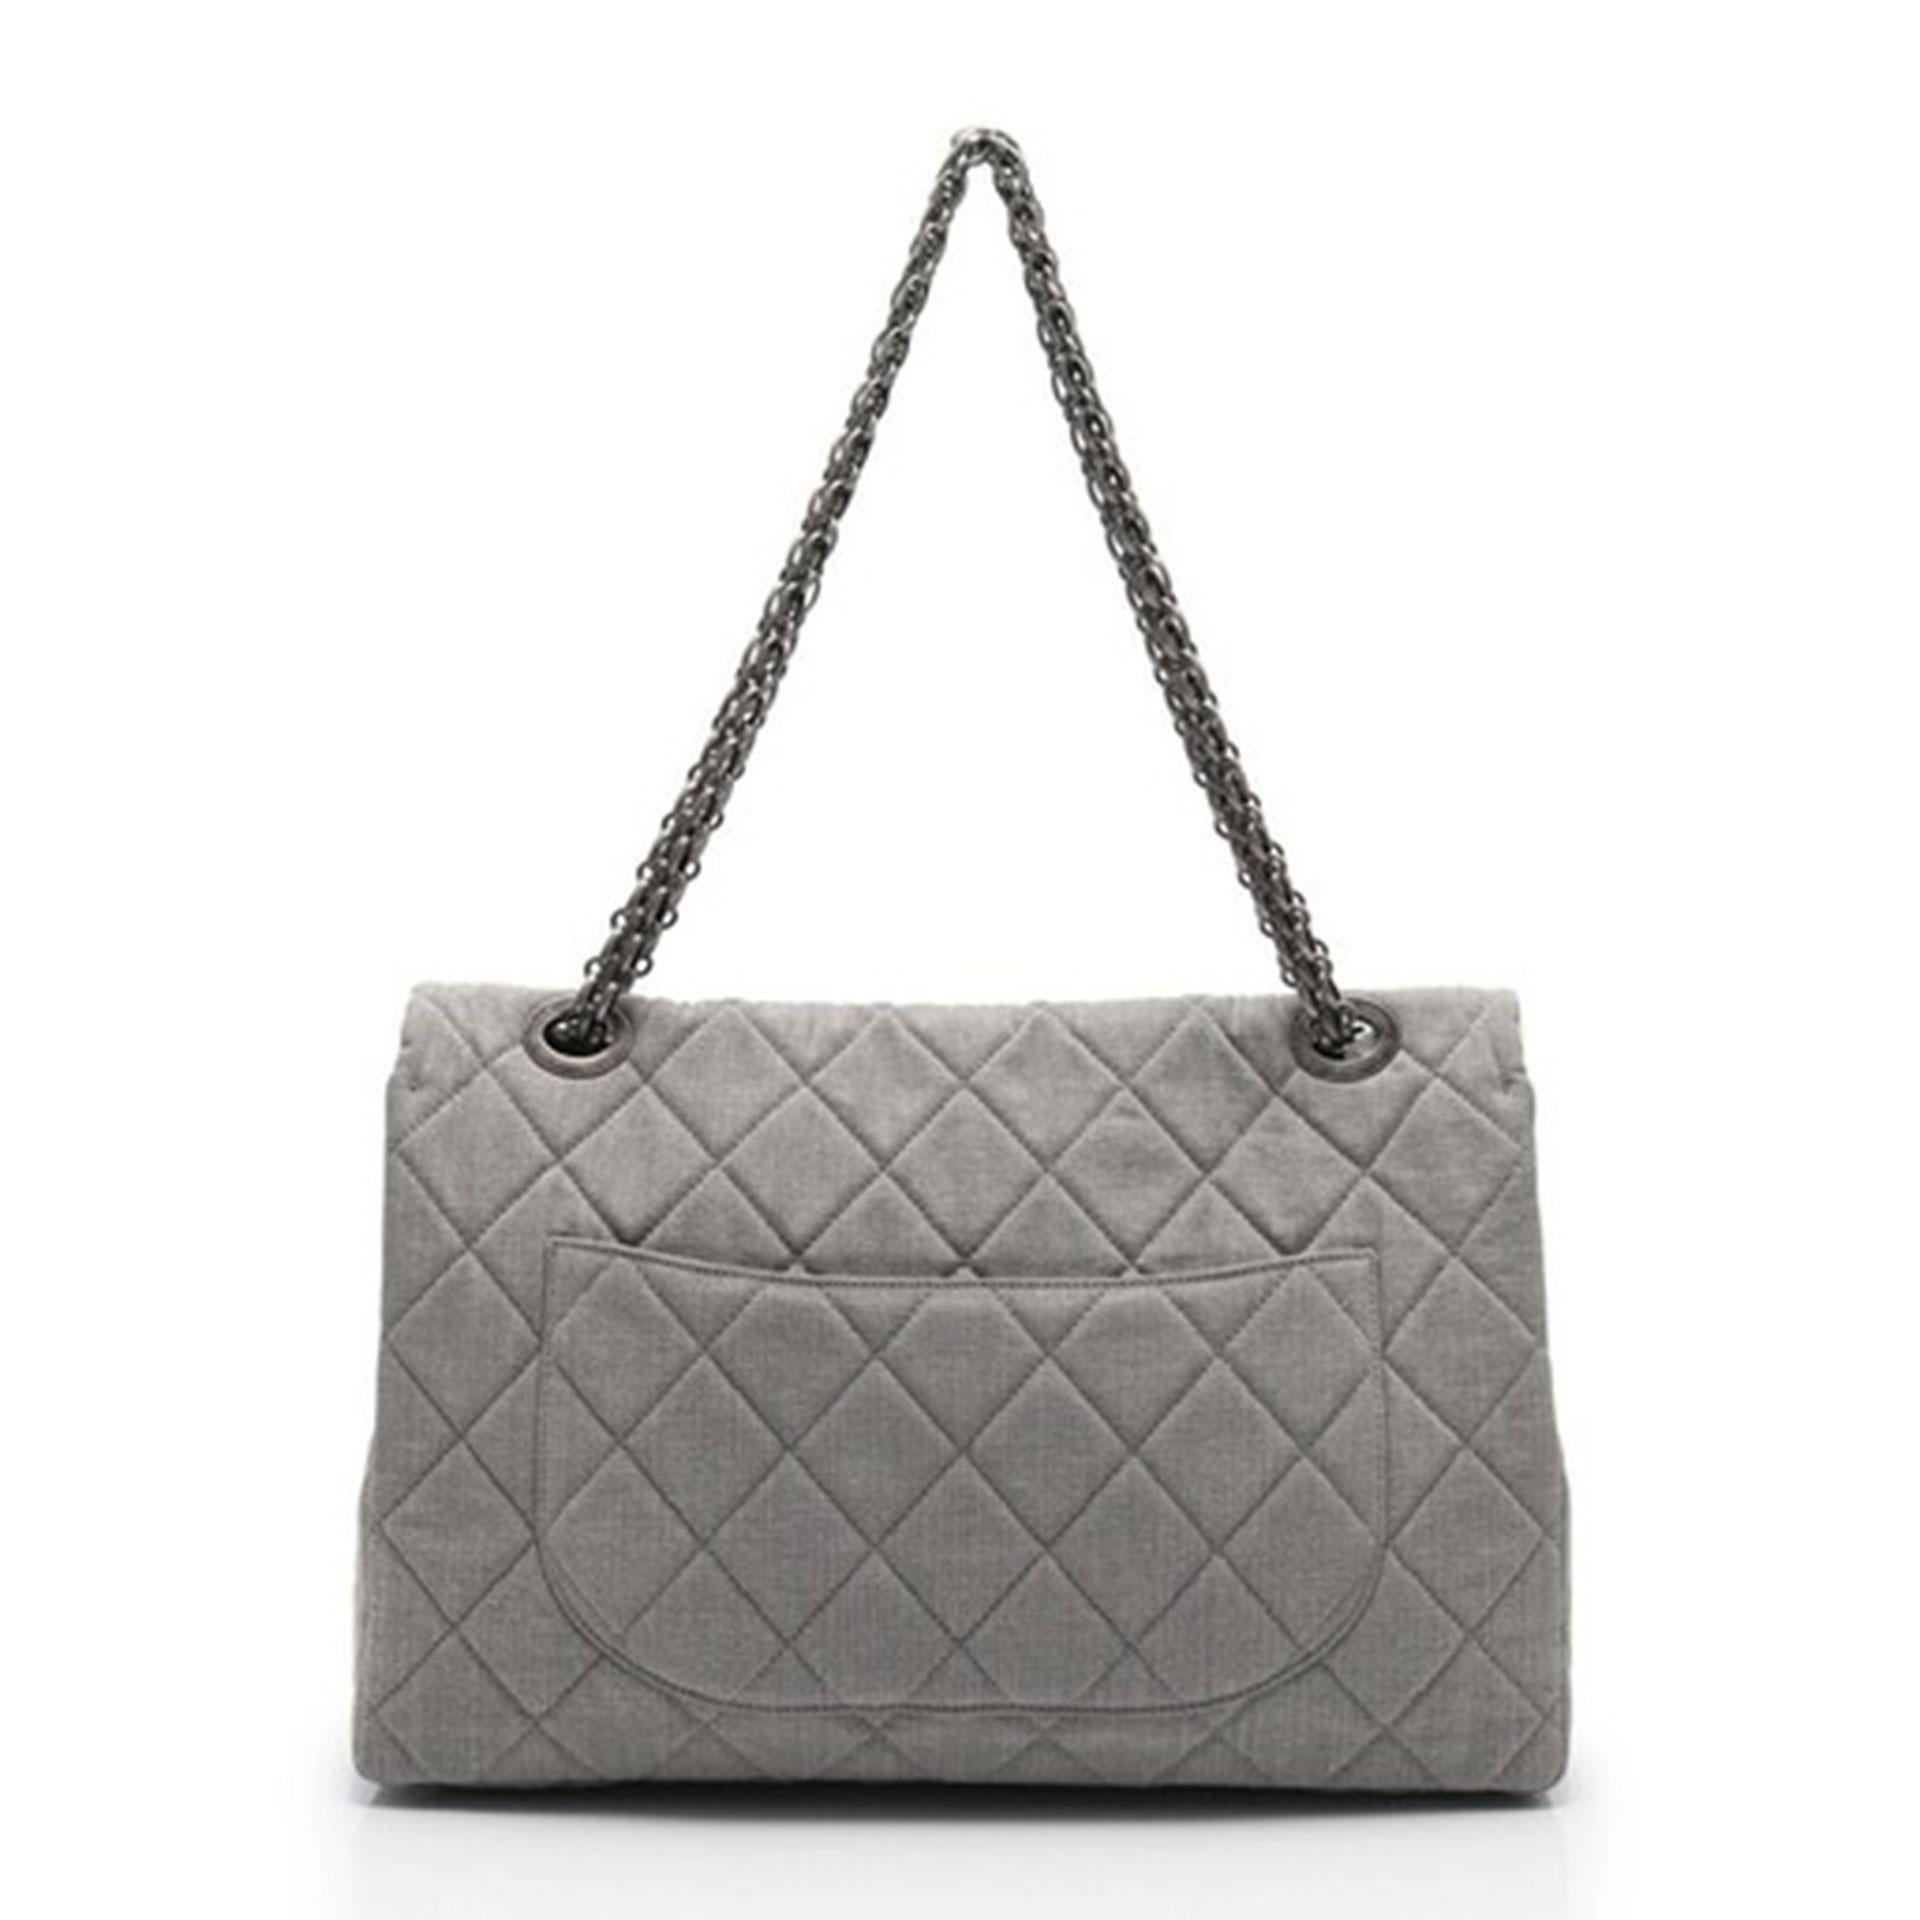 Chanel Reissue XXL Airlines Flap Travel Maxi Bag Grey Quilted Maxi

Stylish Chanel Reissue extra large travel flap bag featuring diamond stitch quilted grey denim canvas in a classic style with a frontal flap. It features two strands of ruthenium